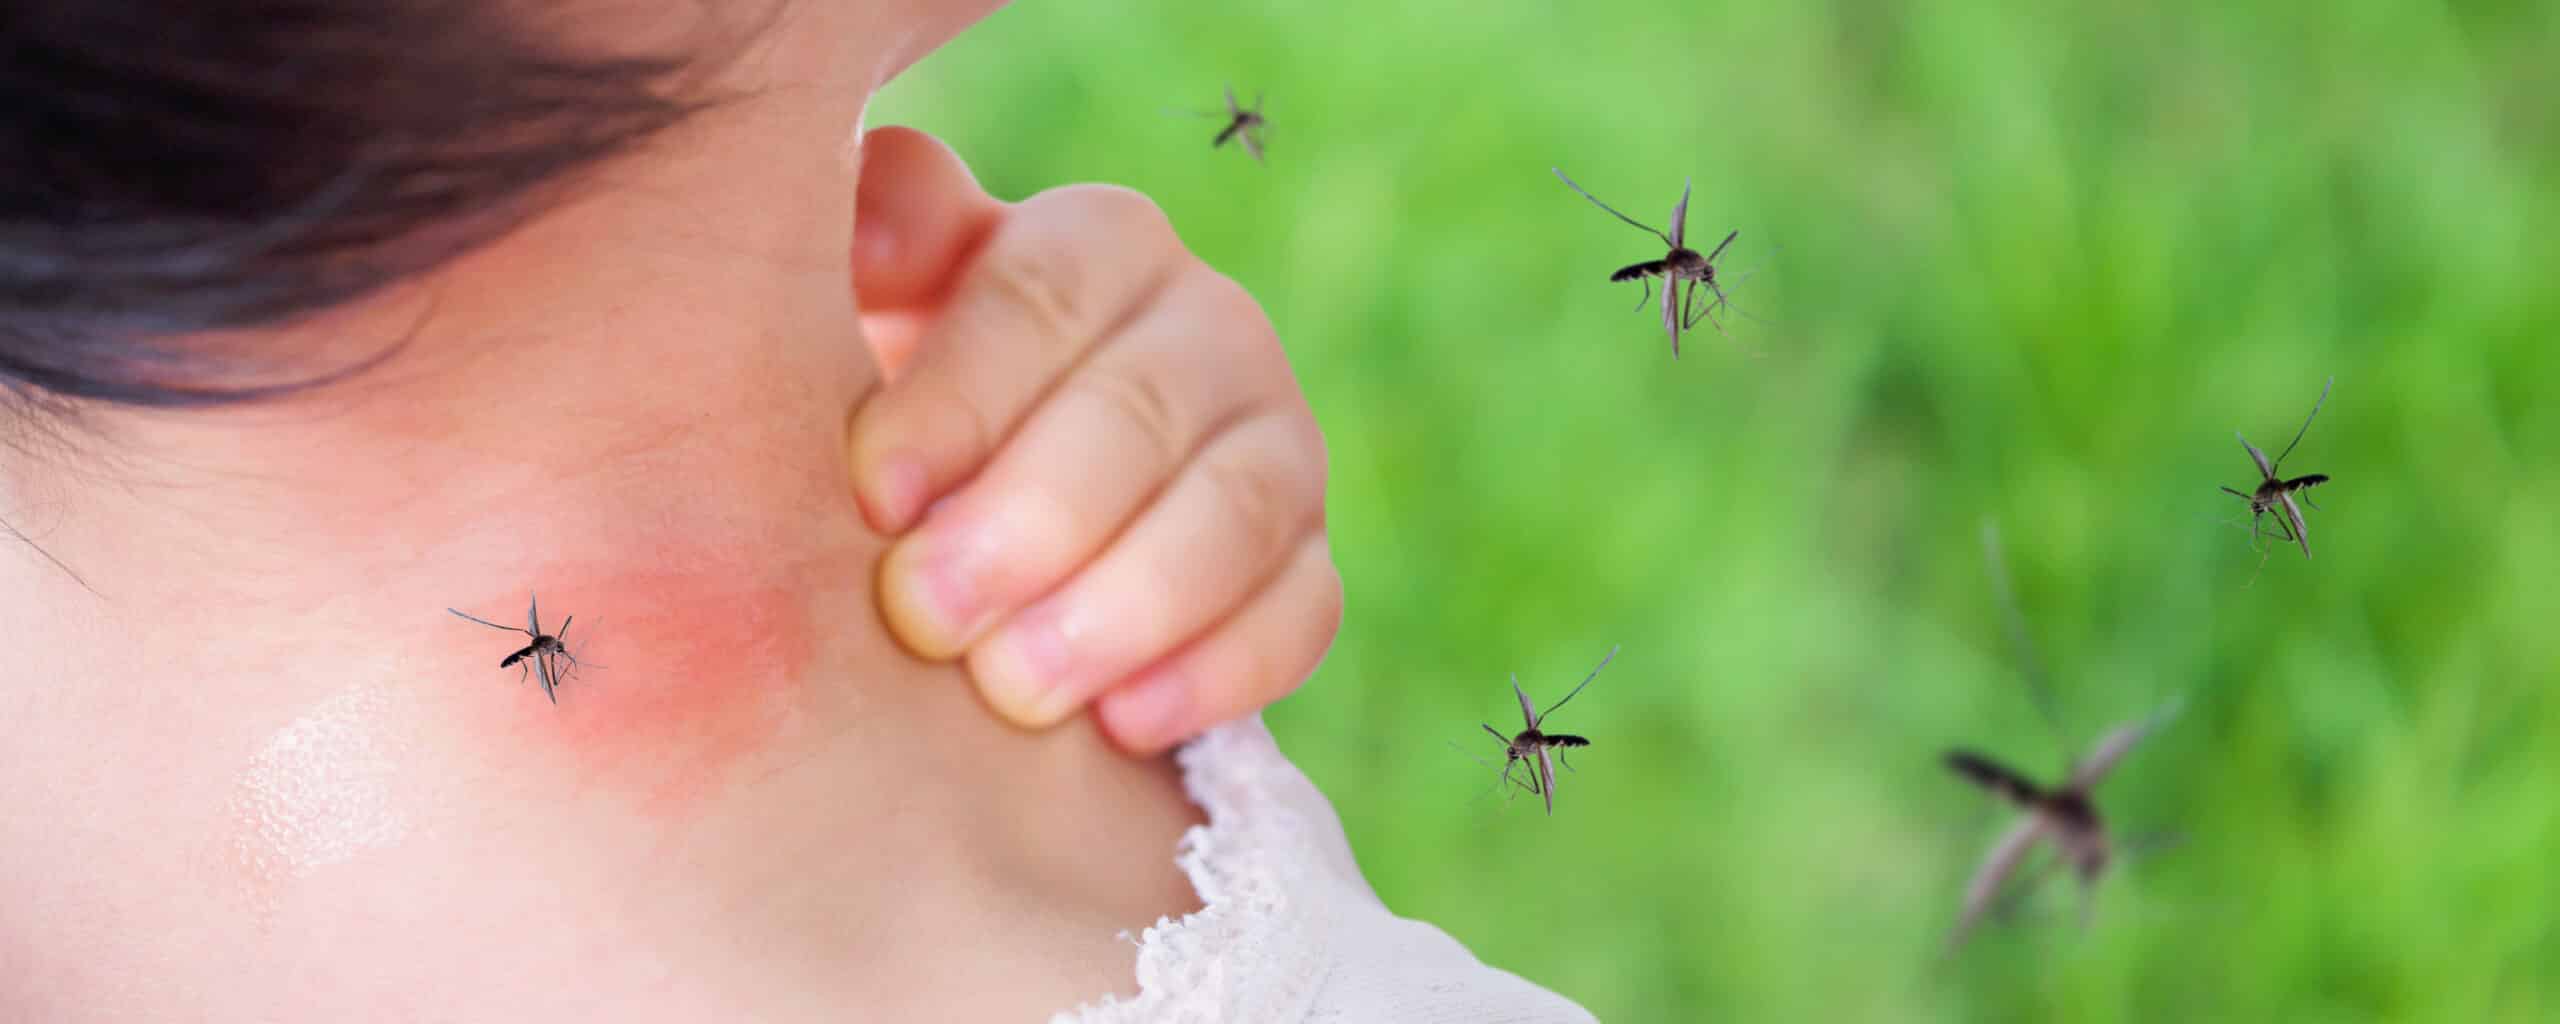 mosquito, mossie, bite, mossie magnet, bug spray, repellent, why, midgie, natural, alternative, chemical, tincture, study trial, science, answer